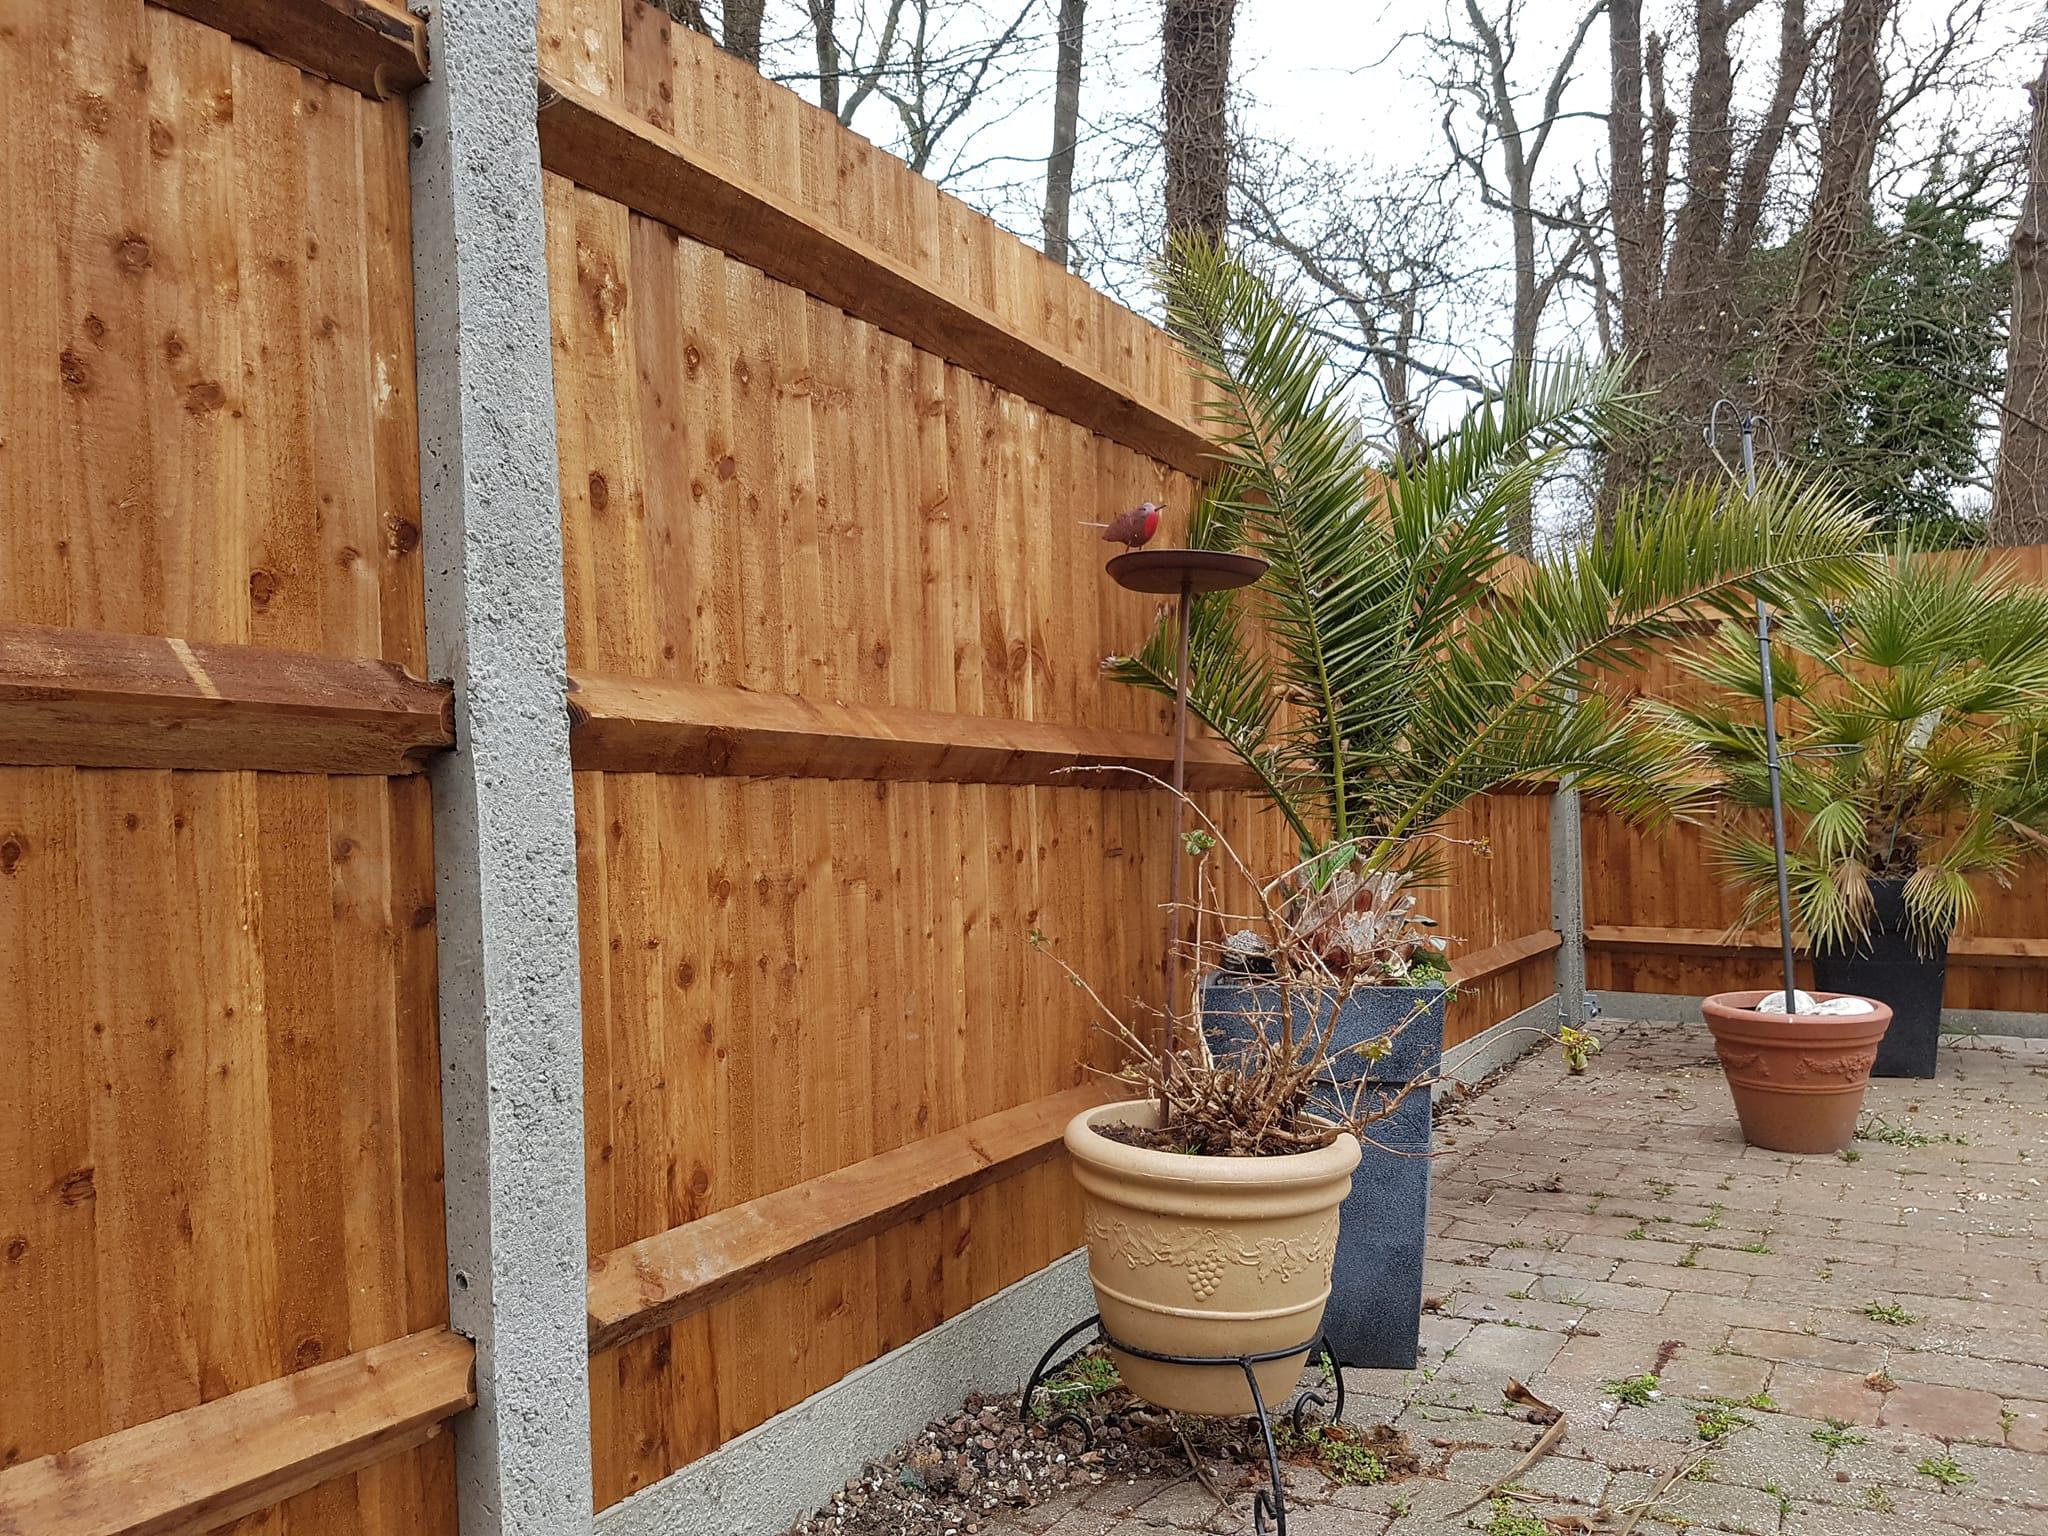 Fencing installed on Rochester